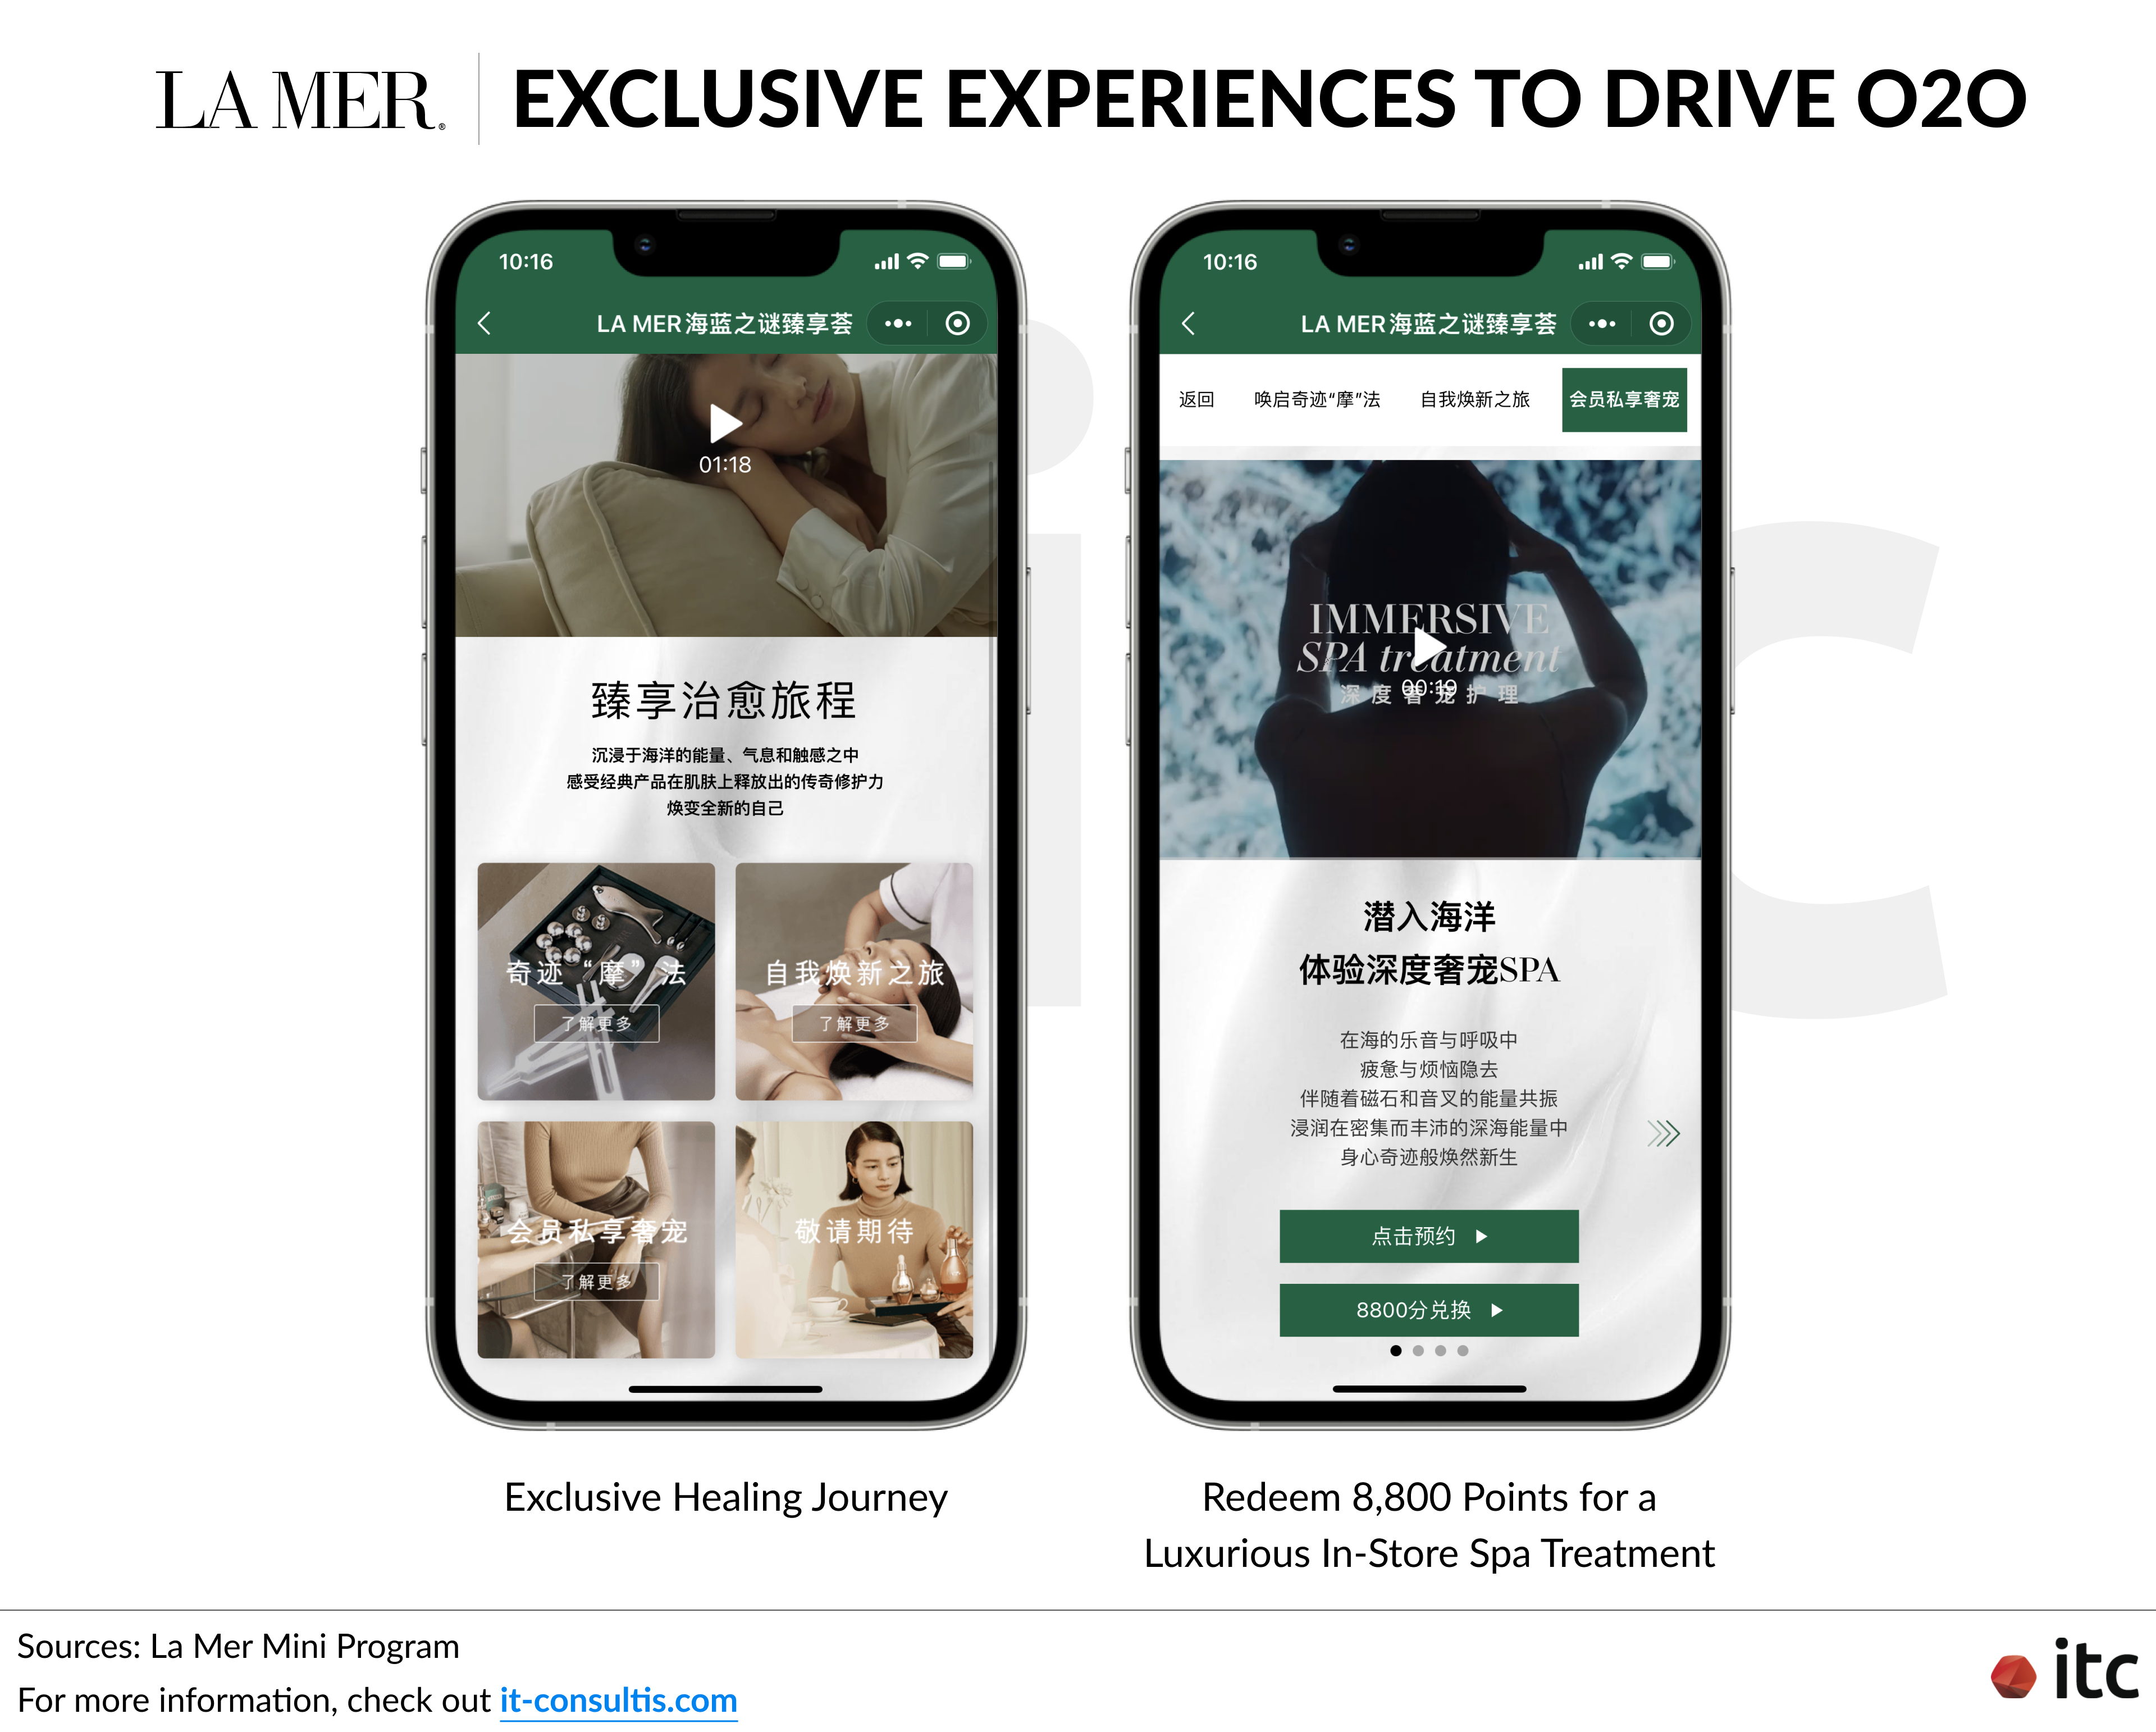 La Mer also offers exclusive in-store experiences to further push customers to frequent its Concept Stores in China